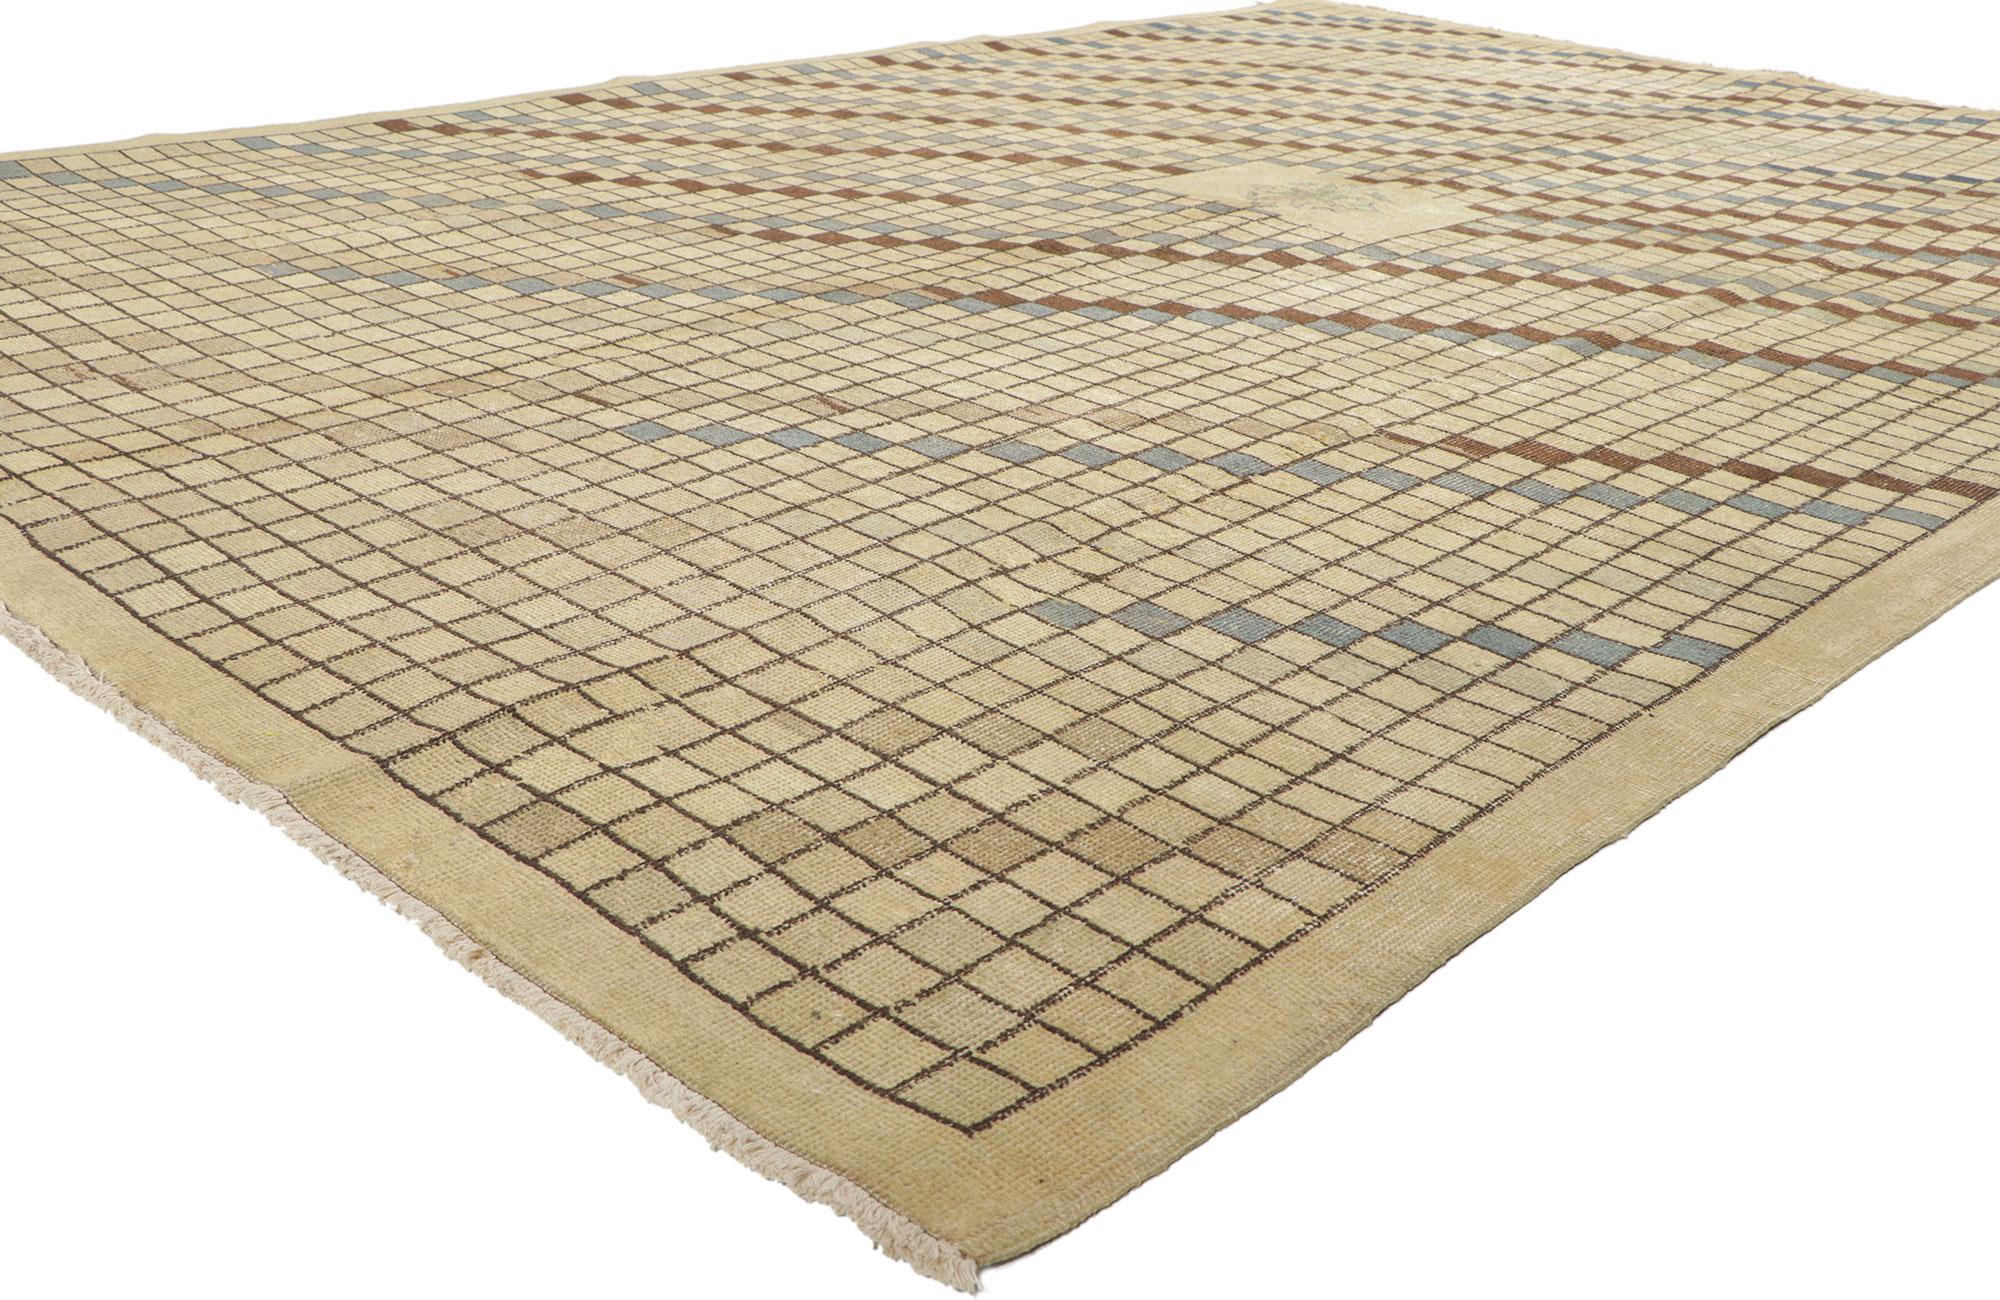 52139 Vintage Turkish Sivas Rug, 06'11 x 10'03.
This hand-knotted wool distressed vintage Turkish Sivas rug with Modern rustic style features an all-over square pattern. The modest field tastefully complements the simple beige border. The intrinsic